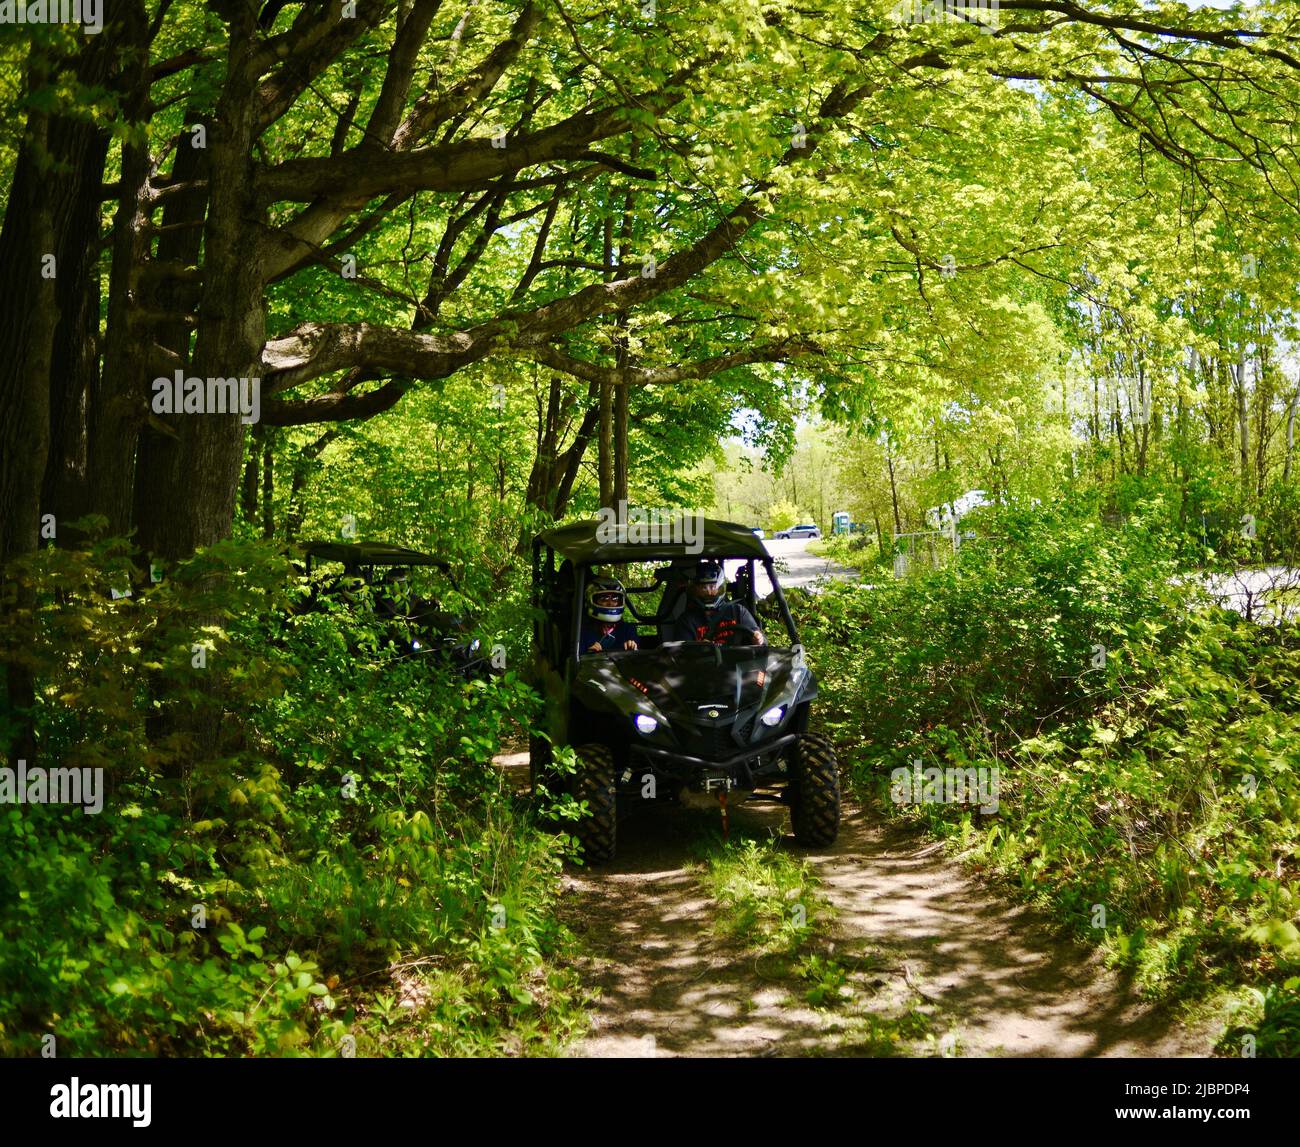 UTV (Utility Terrain Vehicles) 4x4 being driven off-road at Road America as a part of a motorized adventure experience, Elkhart Lake, Wisconsin, USA Stock Photo